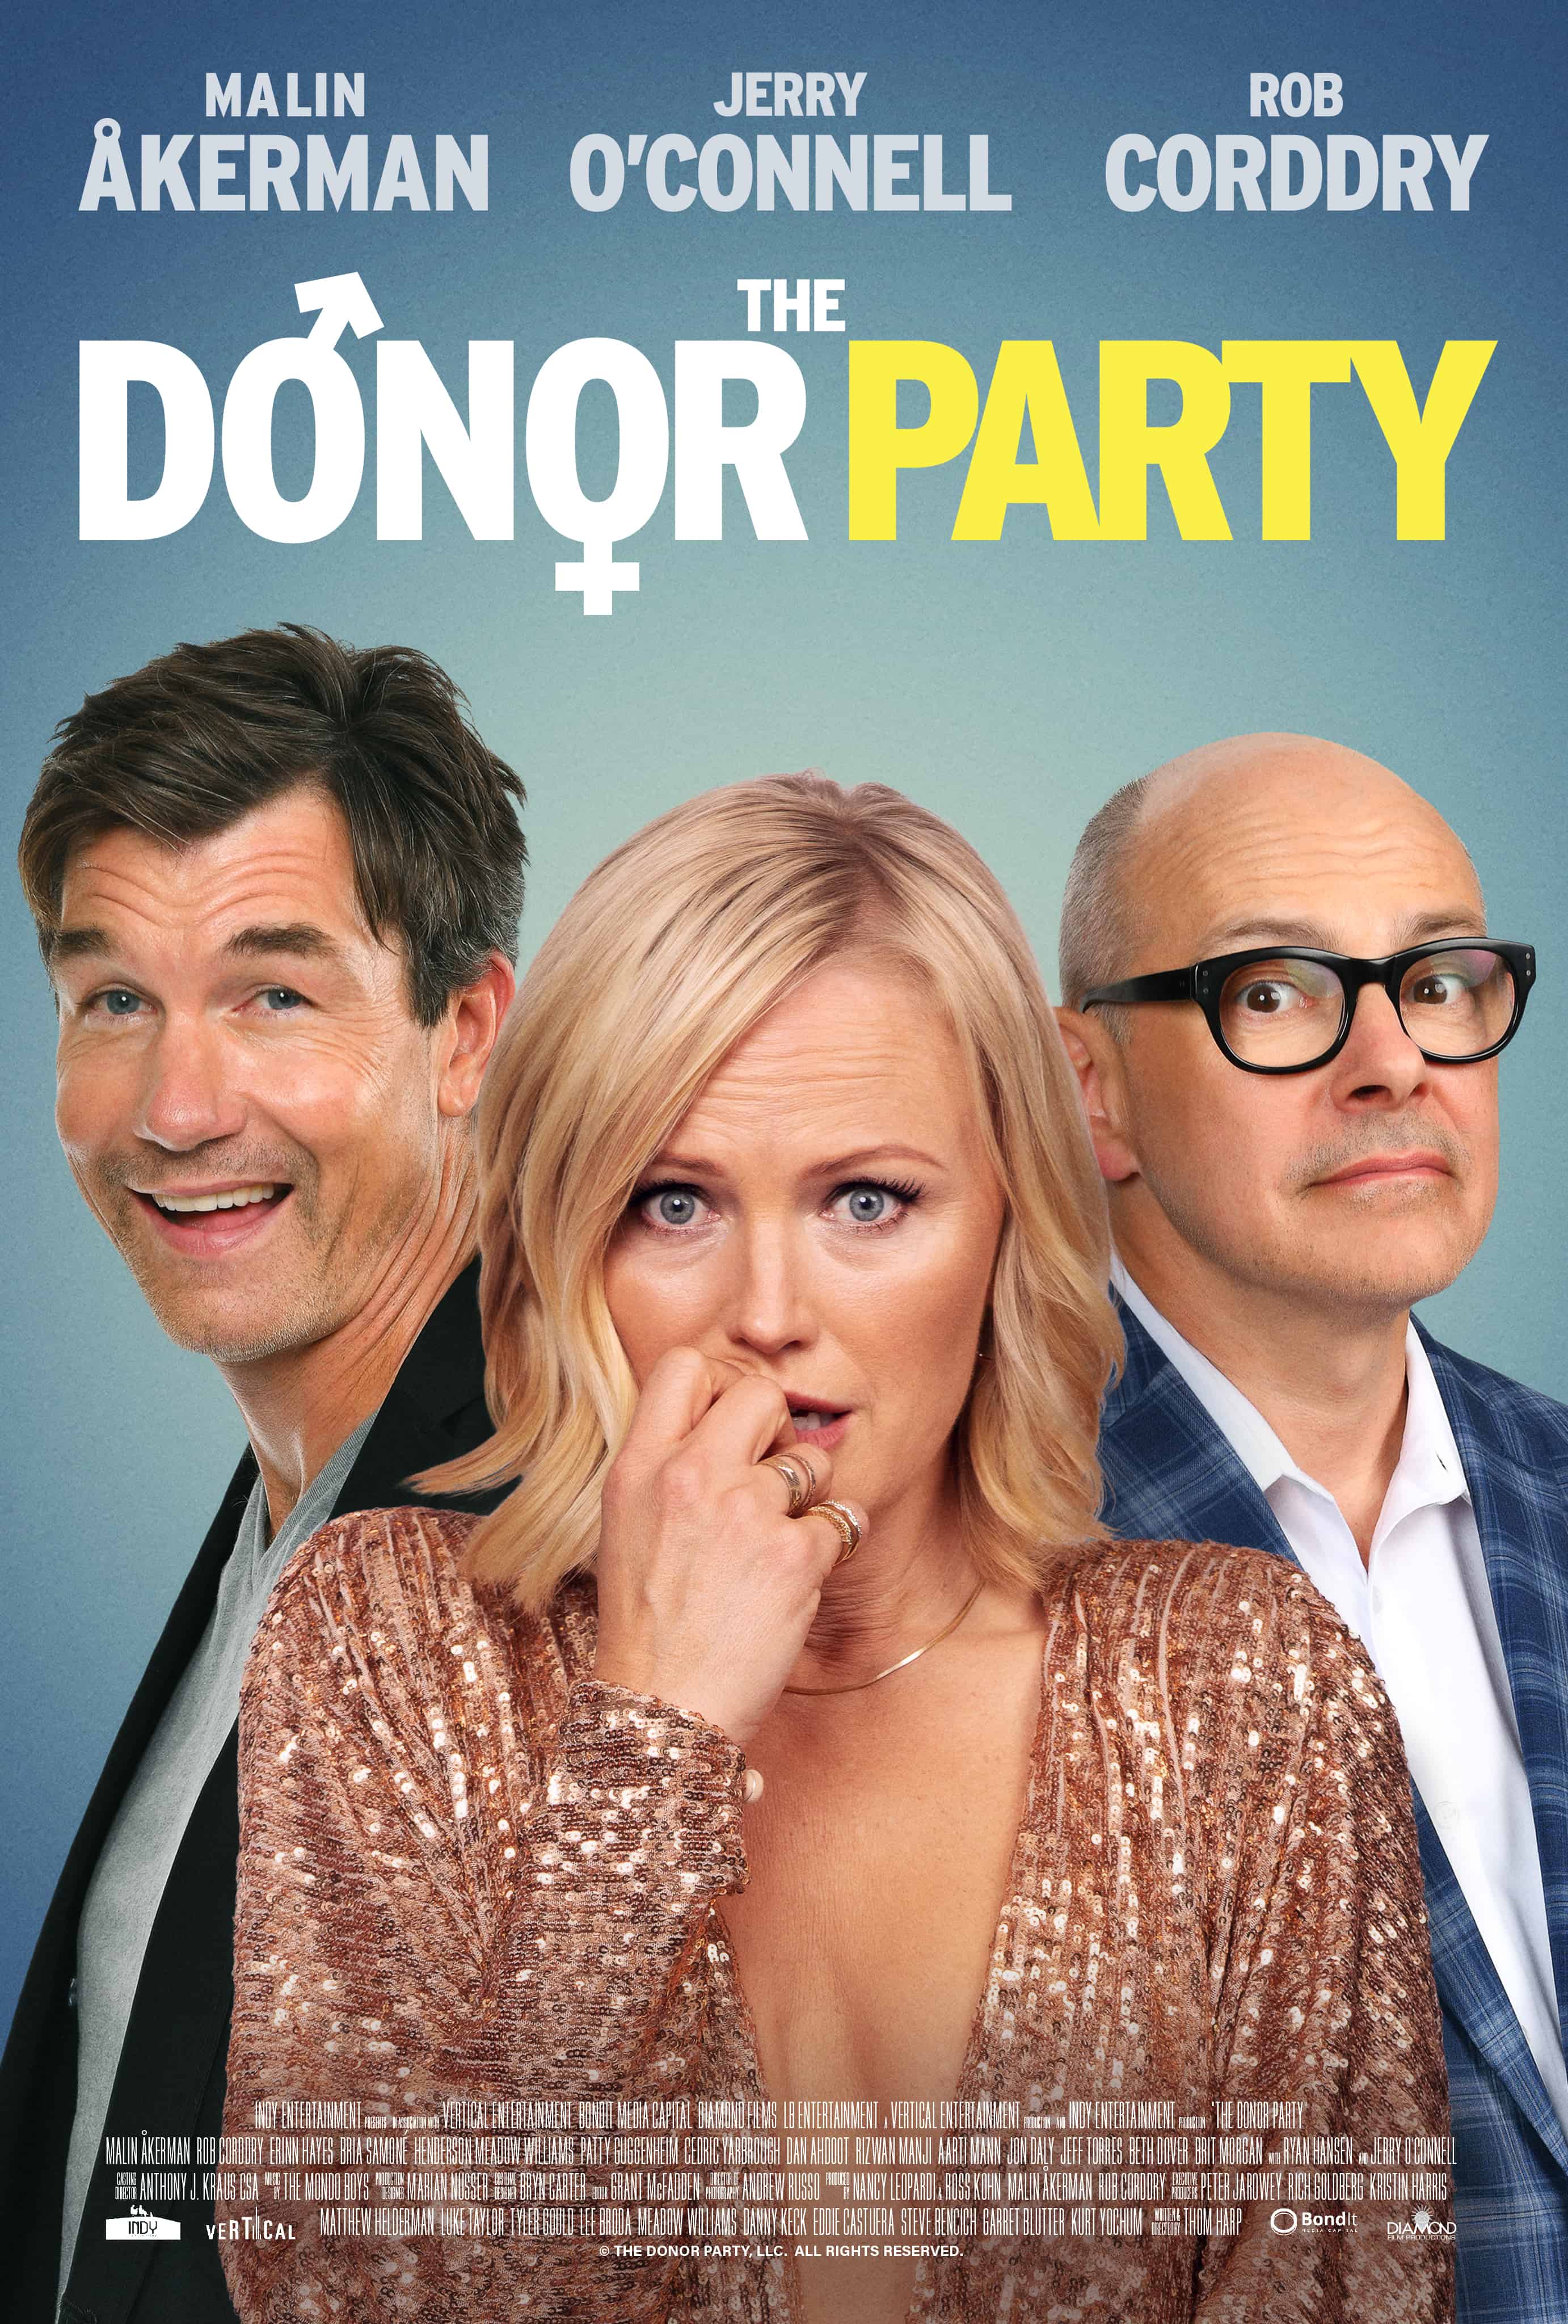 The Donor Party has a new clip! 24